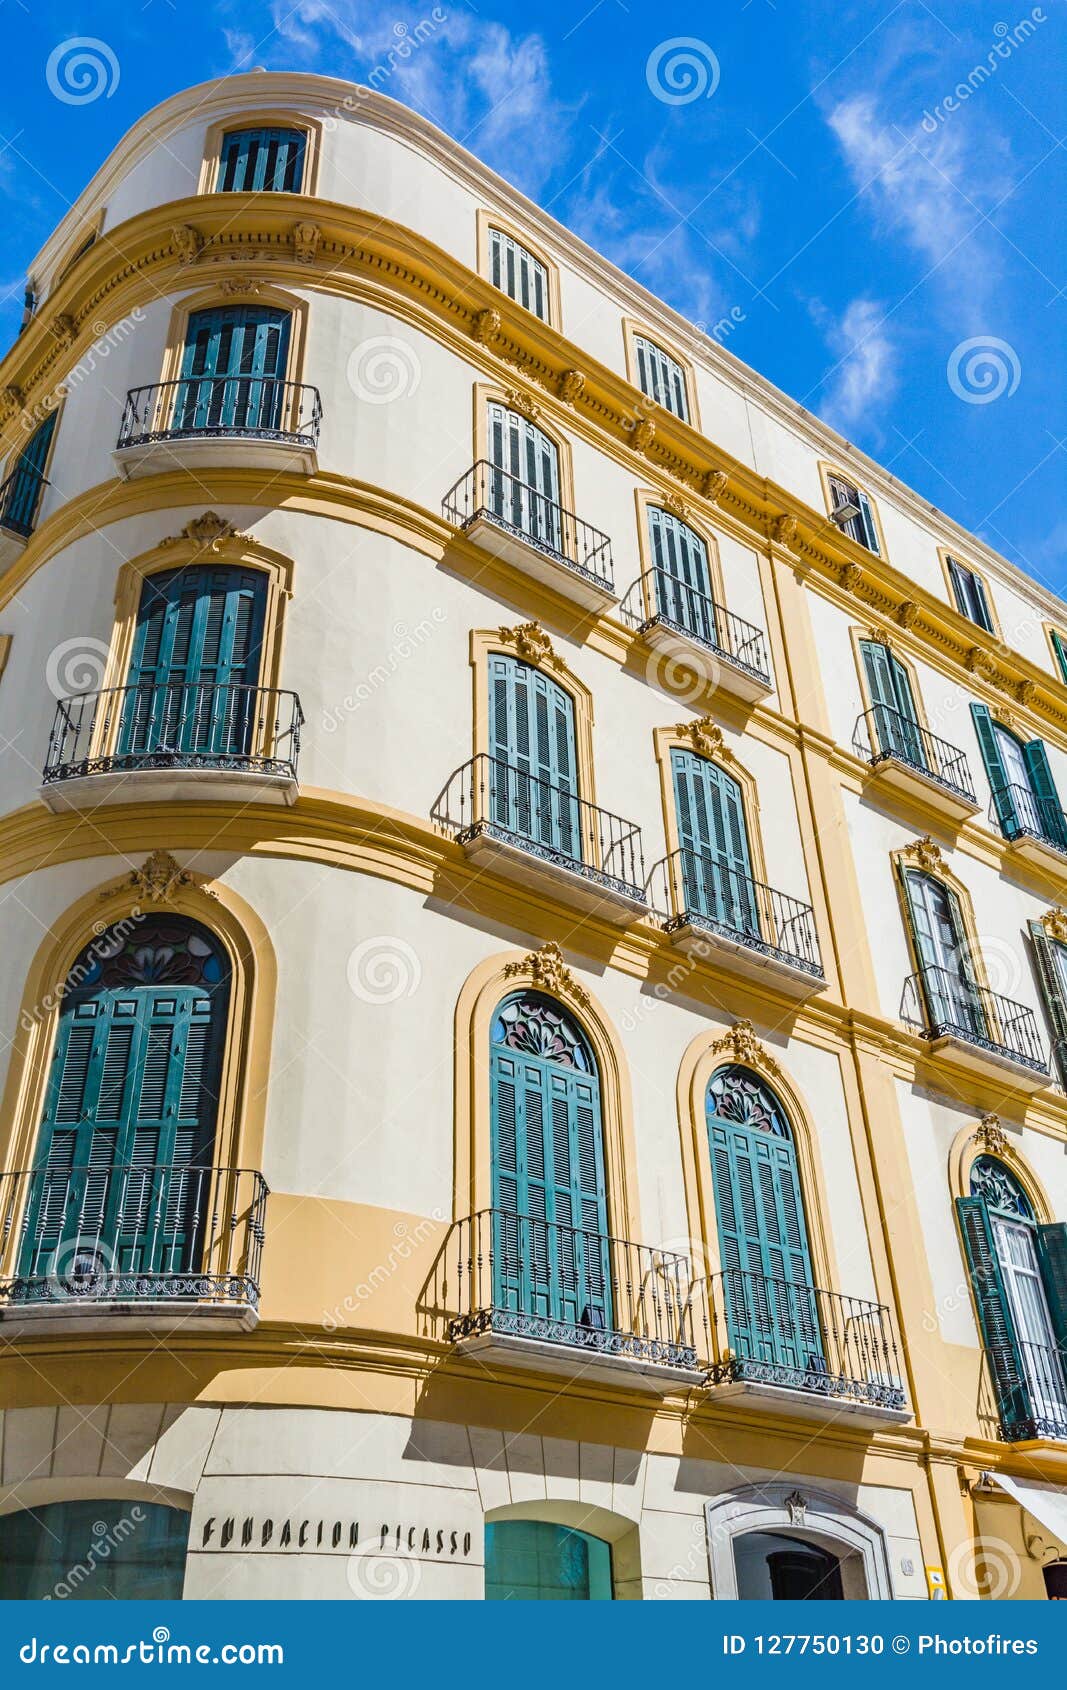 Pablo Picasso S House Museum In Malaga Spain Editorial Image Image Of City South